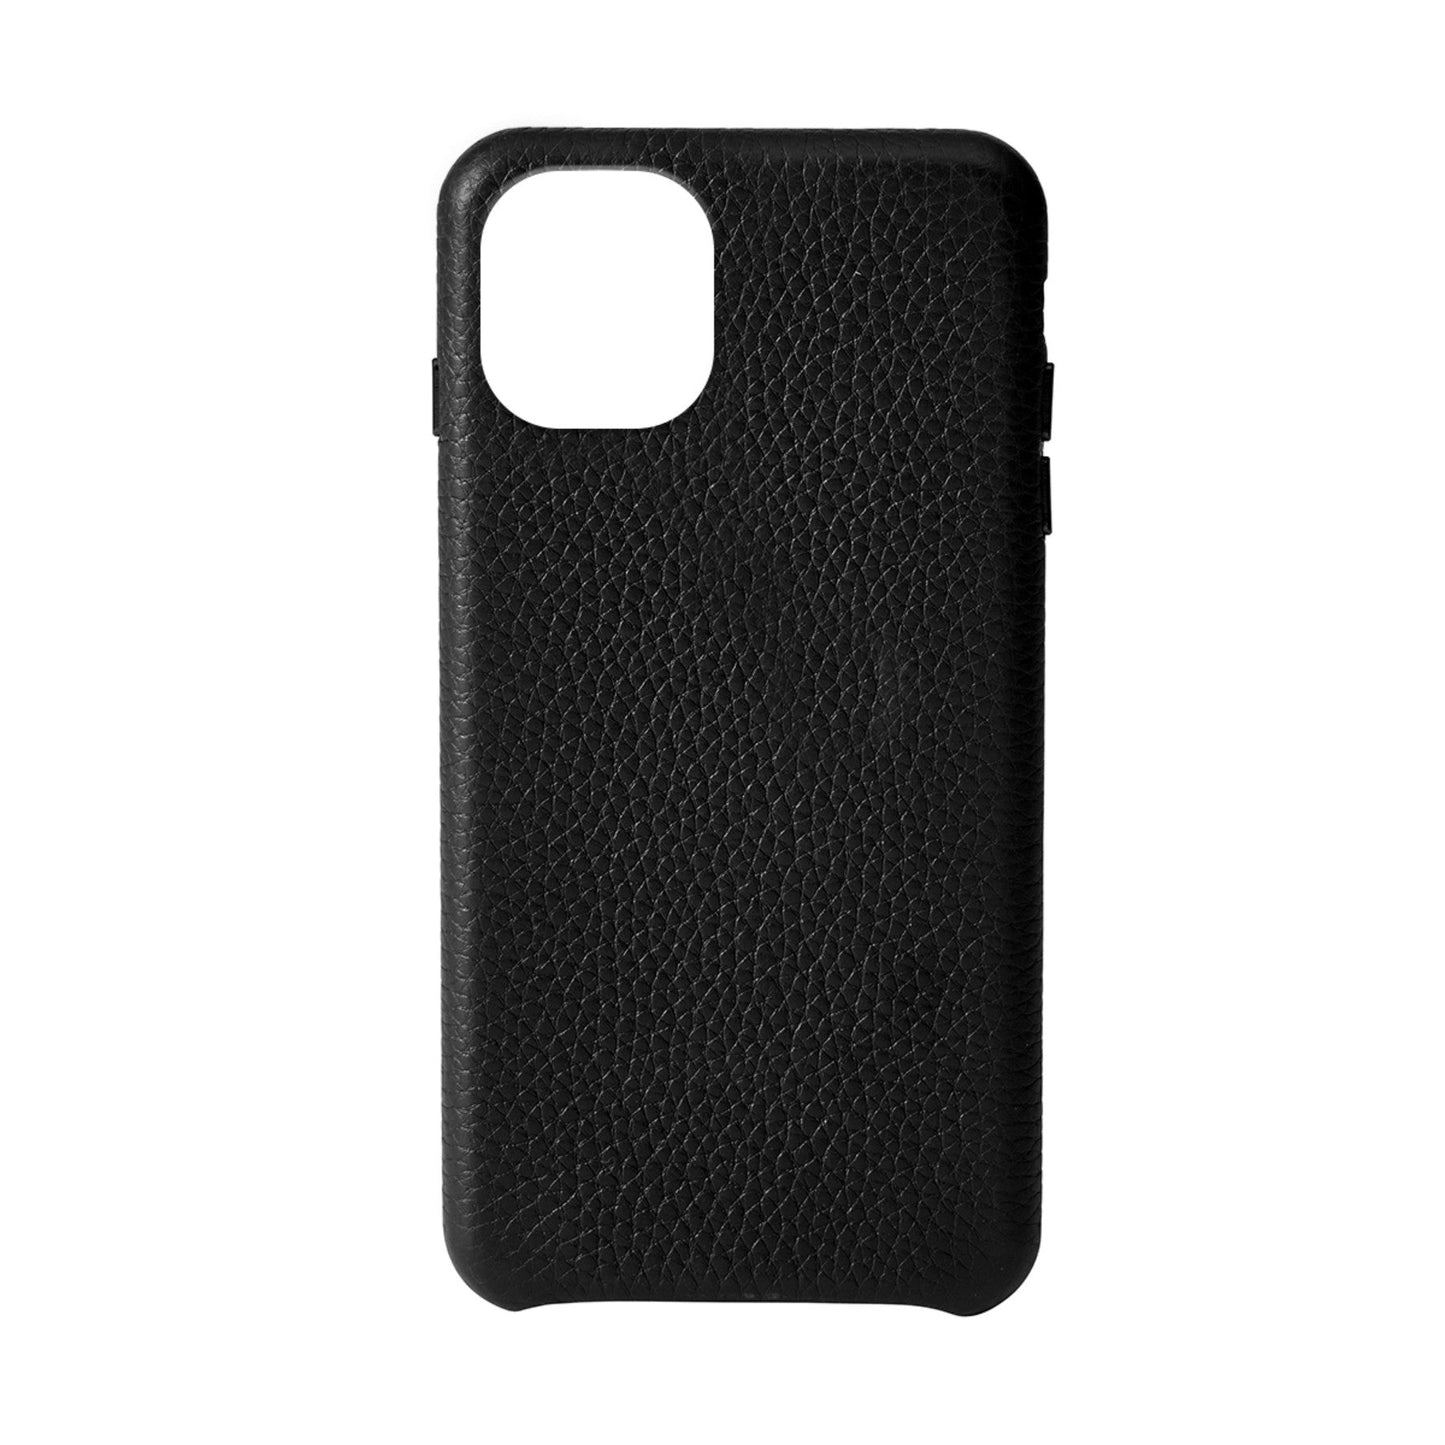 Embossed Leather iPhone 11 Models